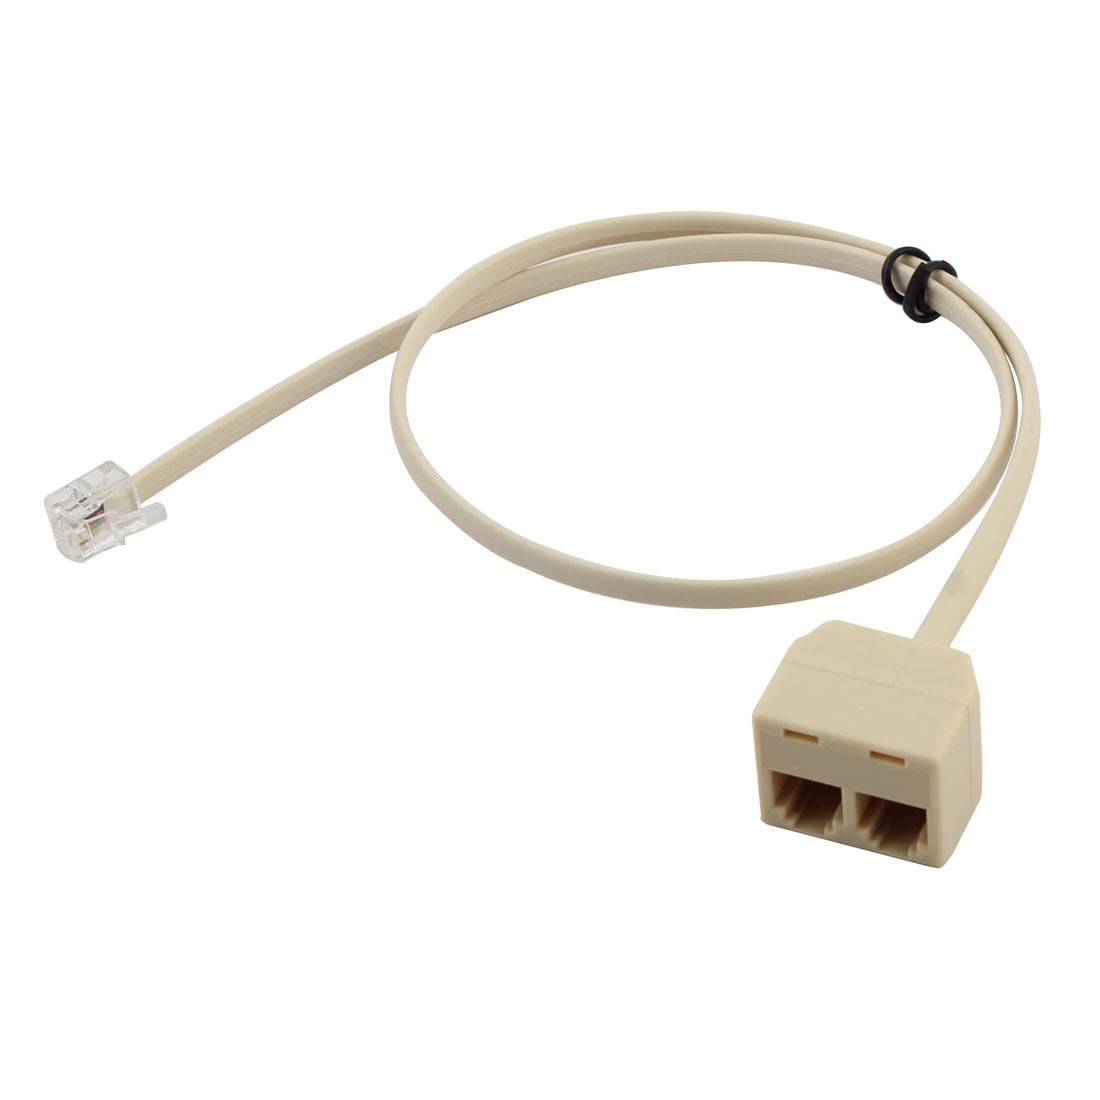 2 Way Telephone Splitter Specially Designed Two RJ11 6P4C Adapter